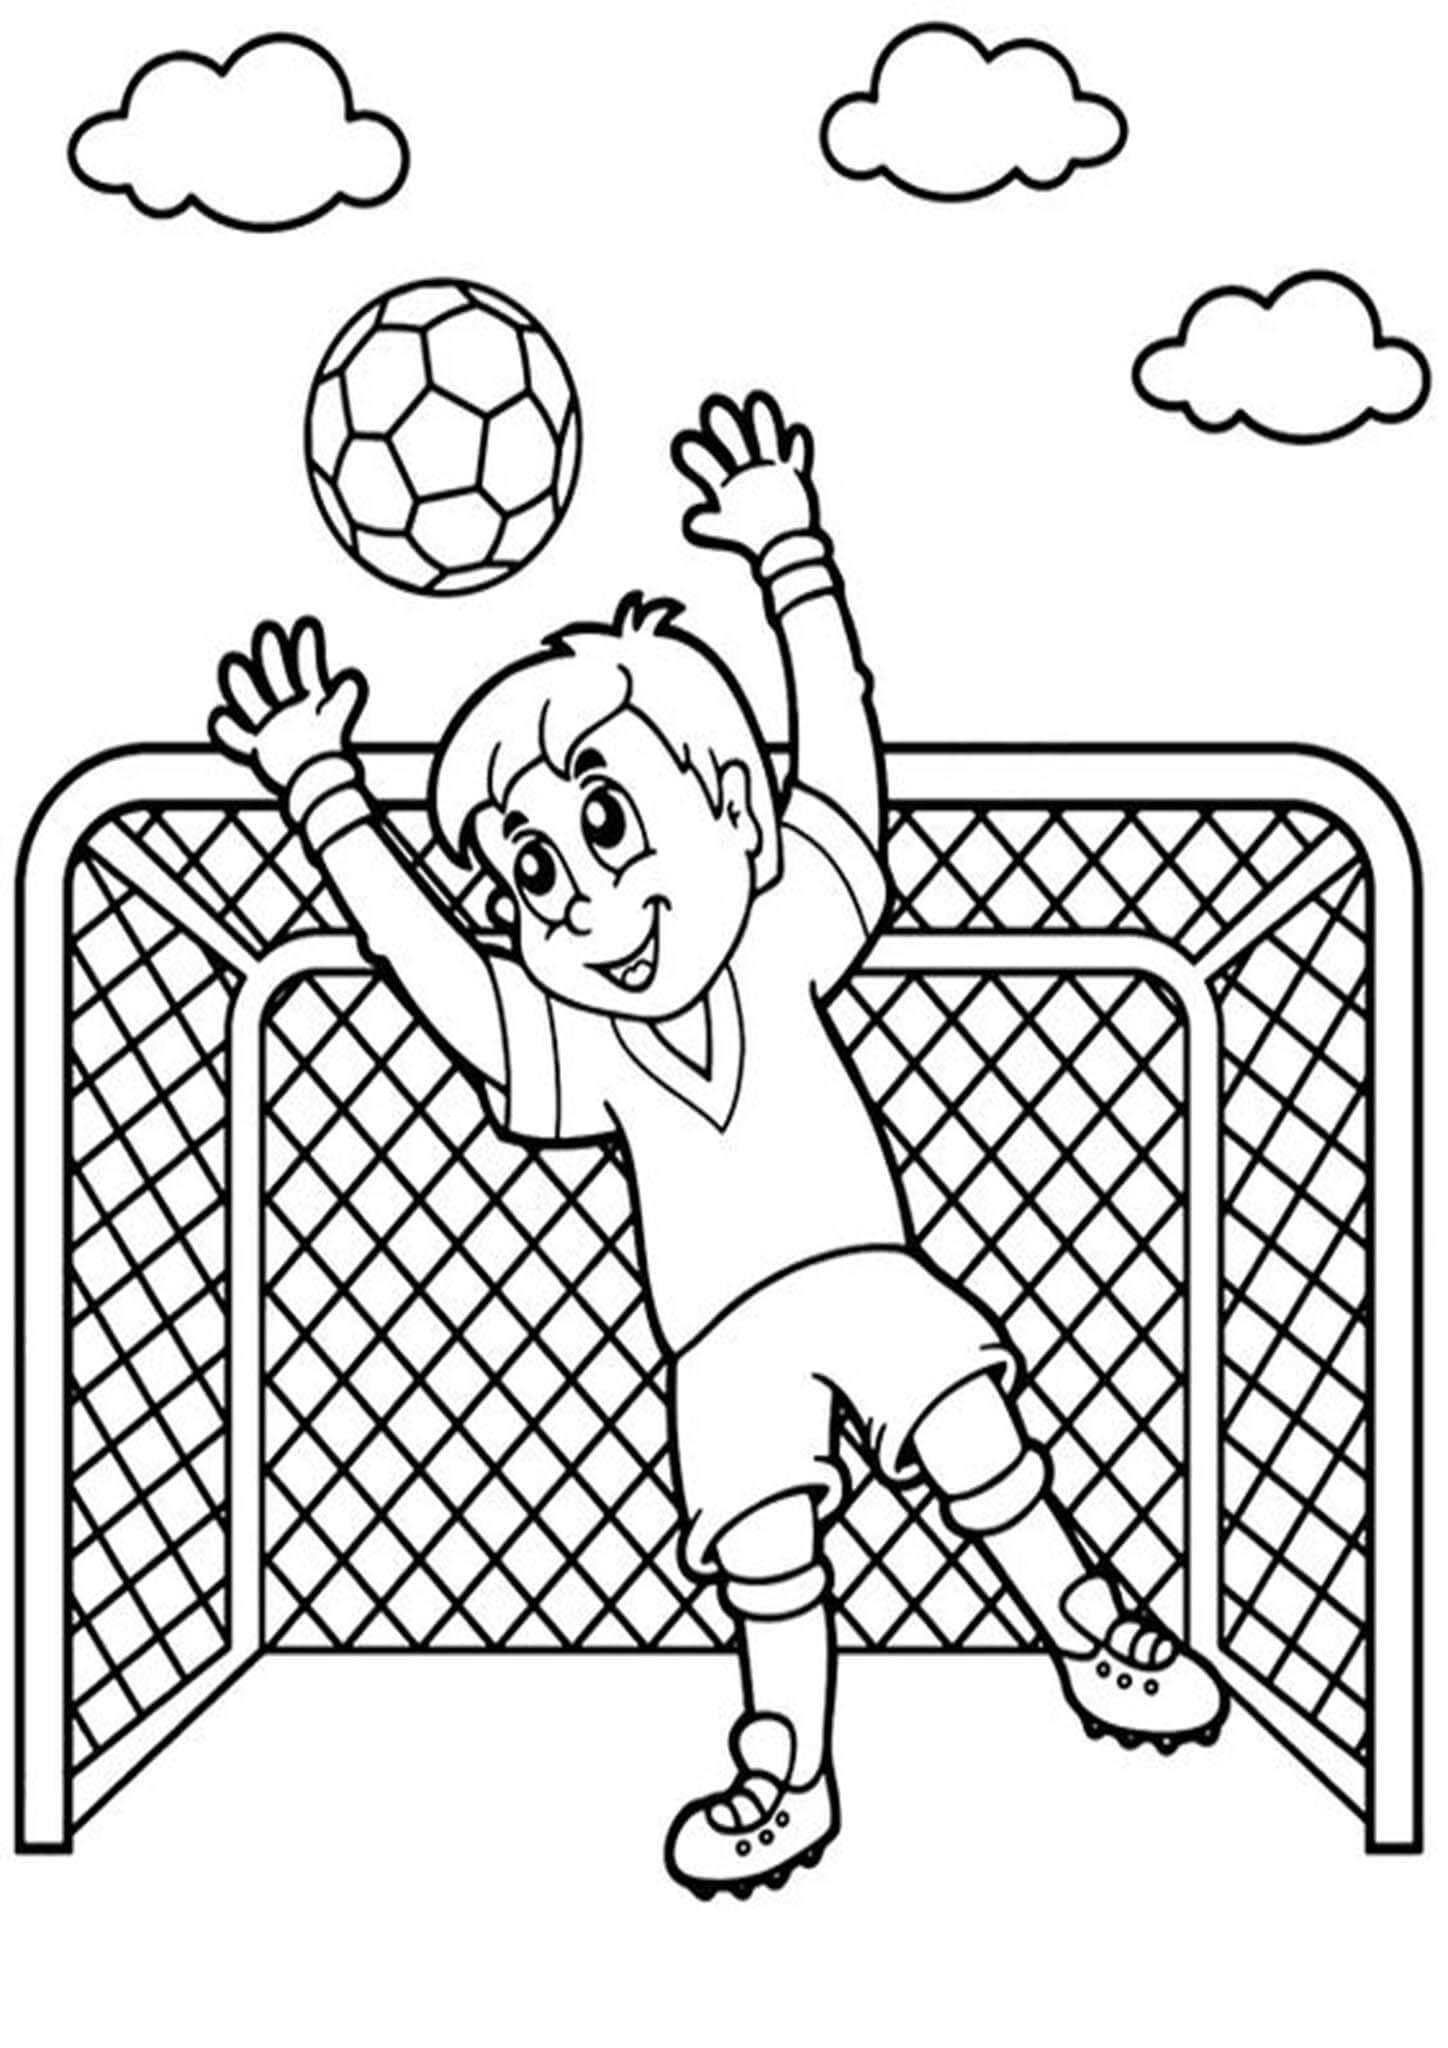 free-easy-to-print-soccer-coloring-pages-tulamama